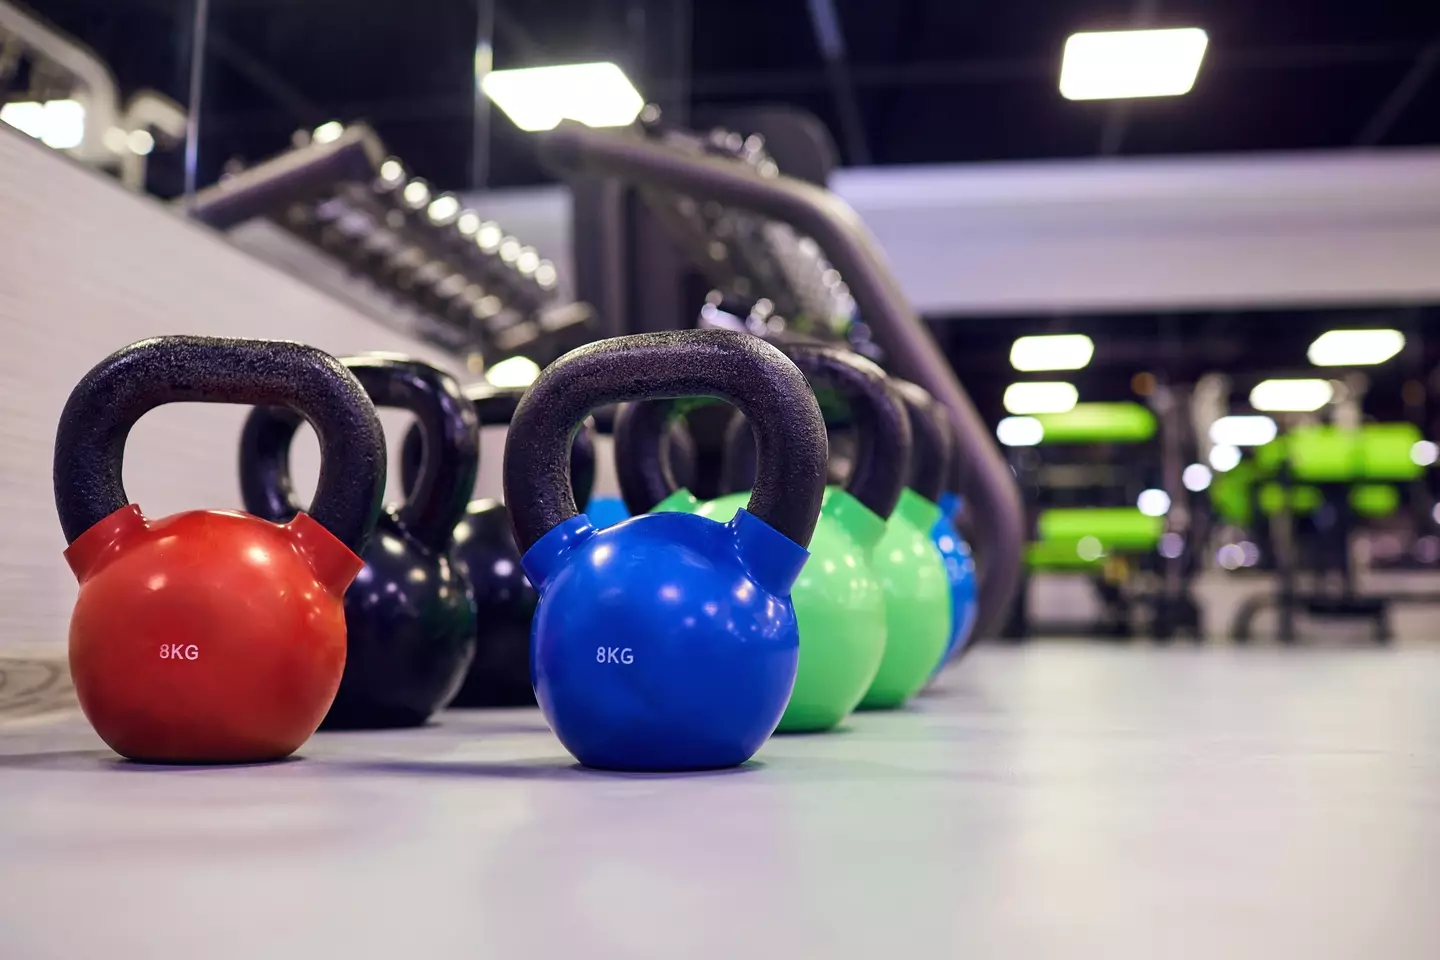 PureGym has received widespread praise for cracking down on people who don't put apparatus away.